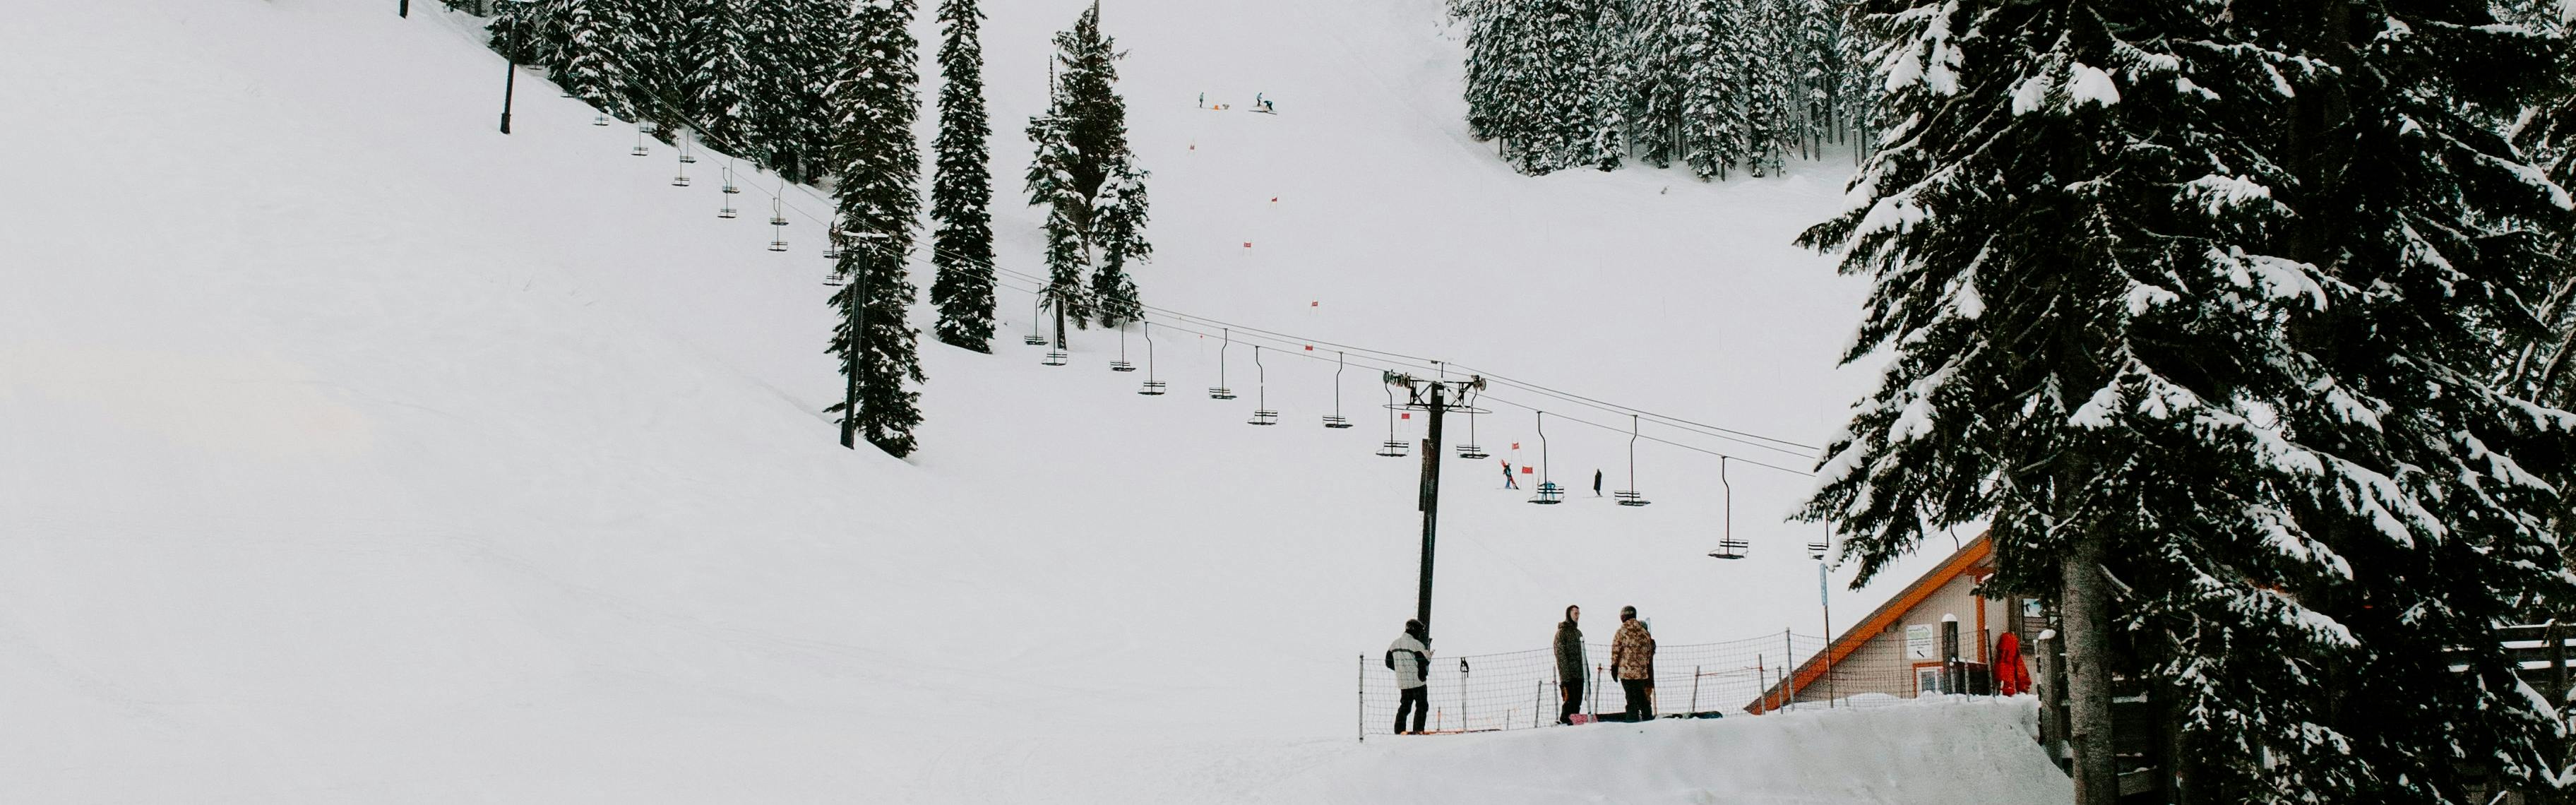 Several skiers at the bottom of a ski resort. 